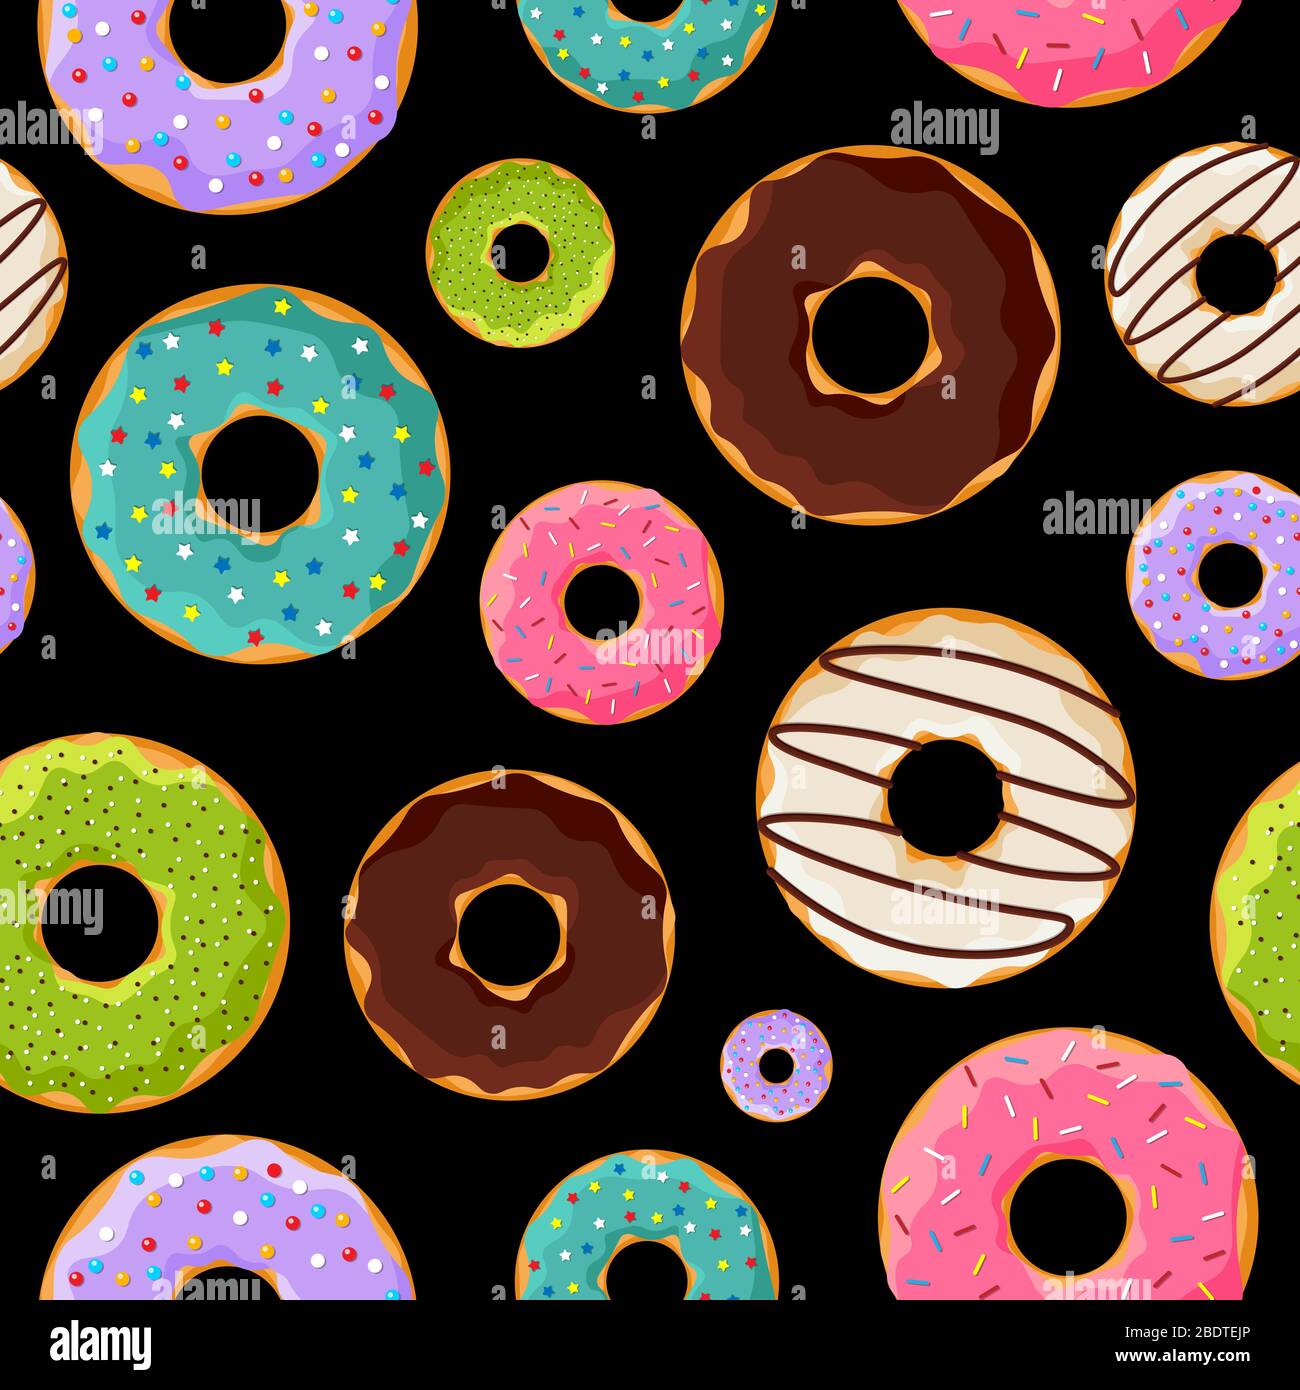 Cute colorful glazed sweet donuts seamless pattern on black background. Vector doughnut bakery food flat eps illustration Stock Vector